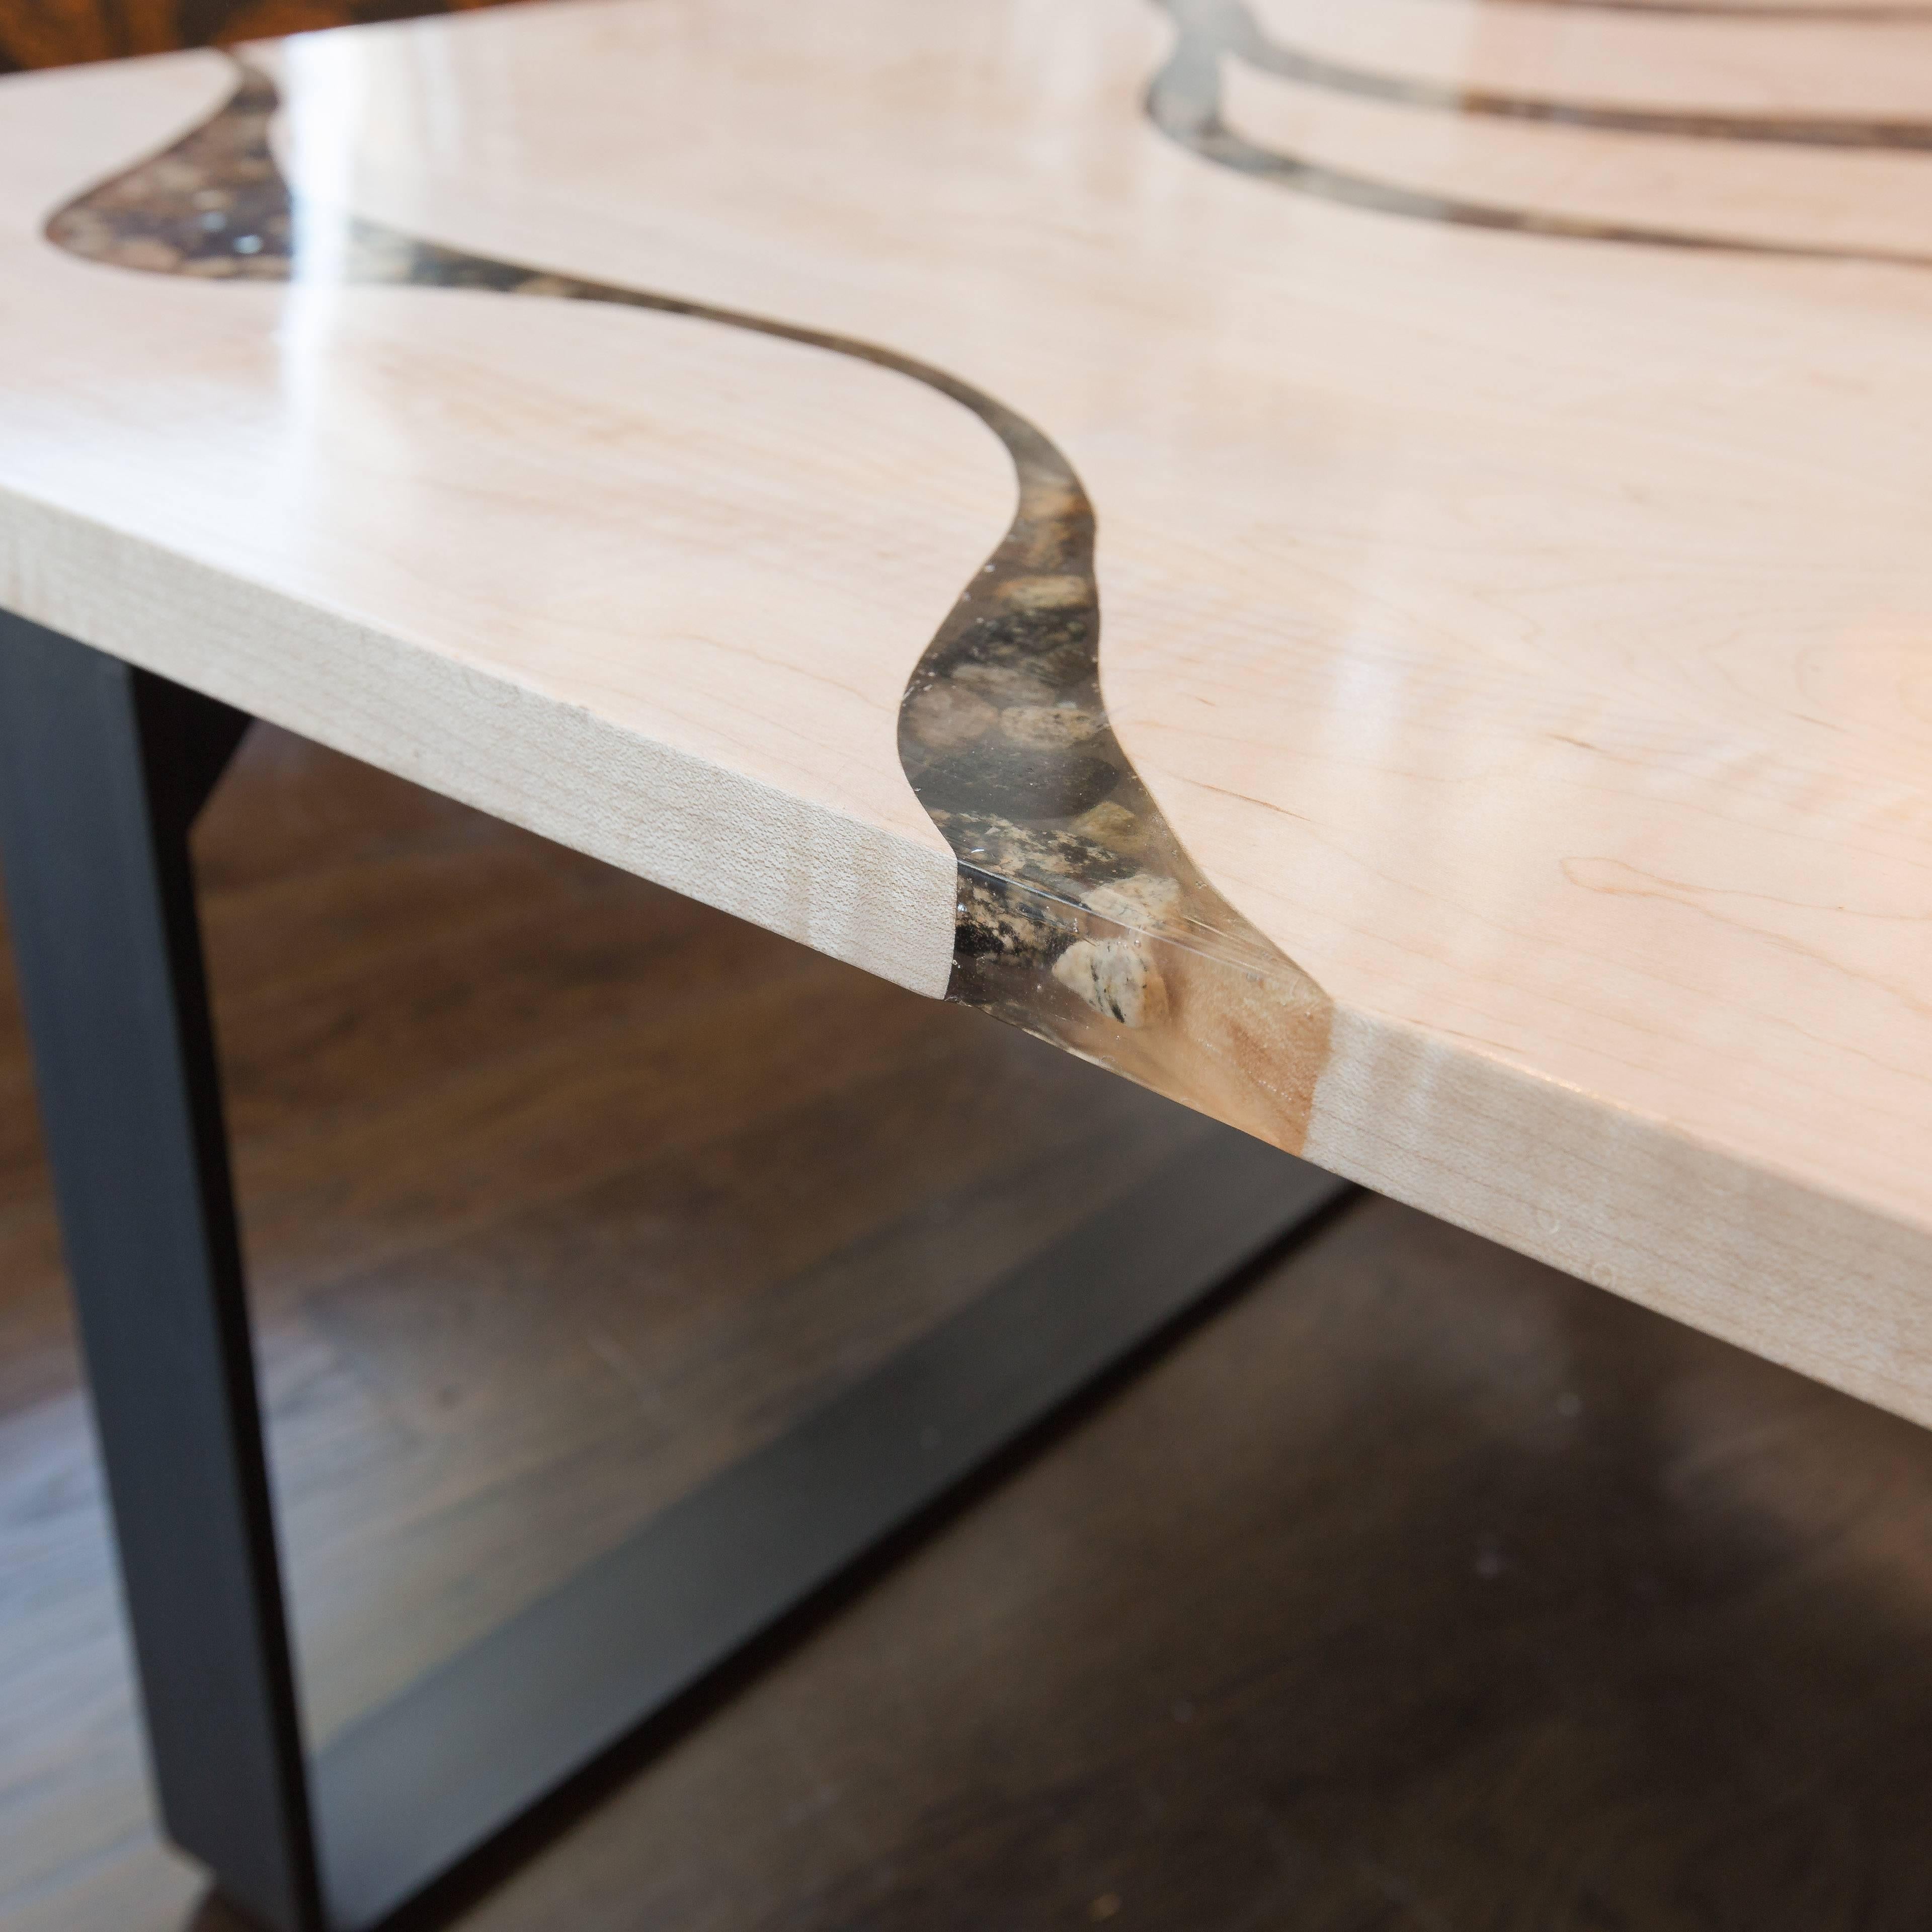 This table by woodworking artist Jeff Greenberg is made from hard maple with 